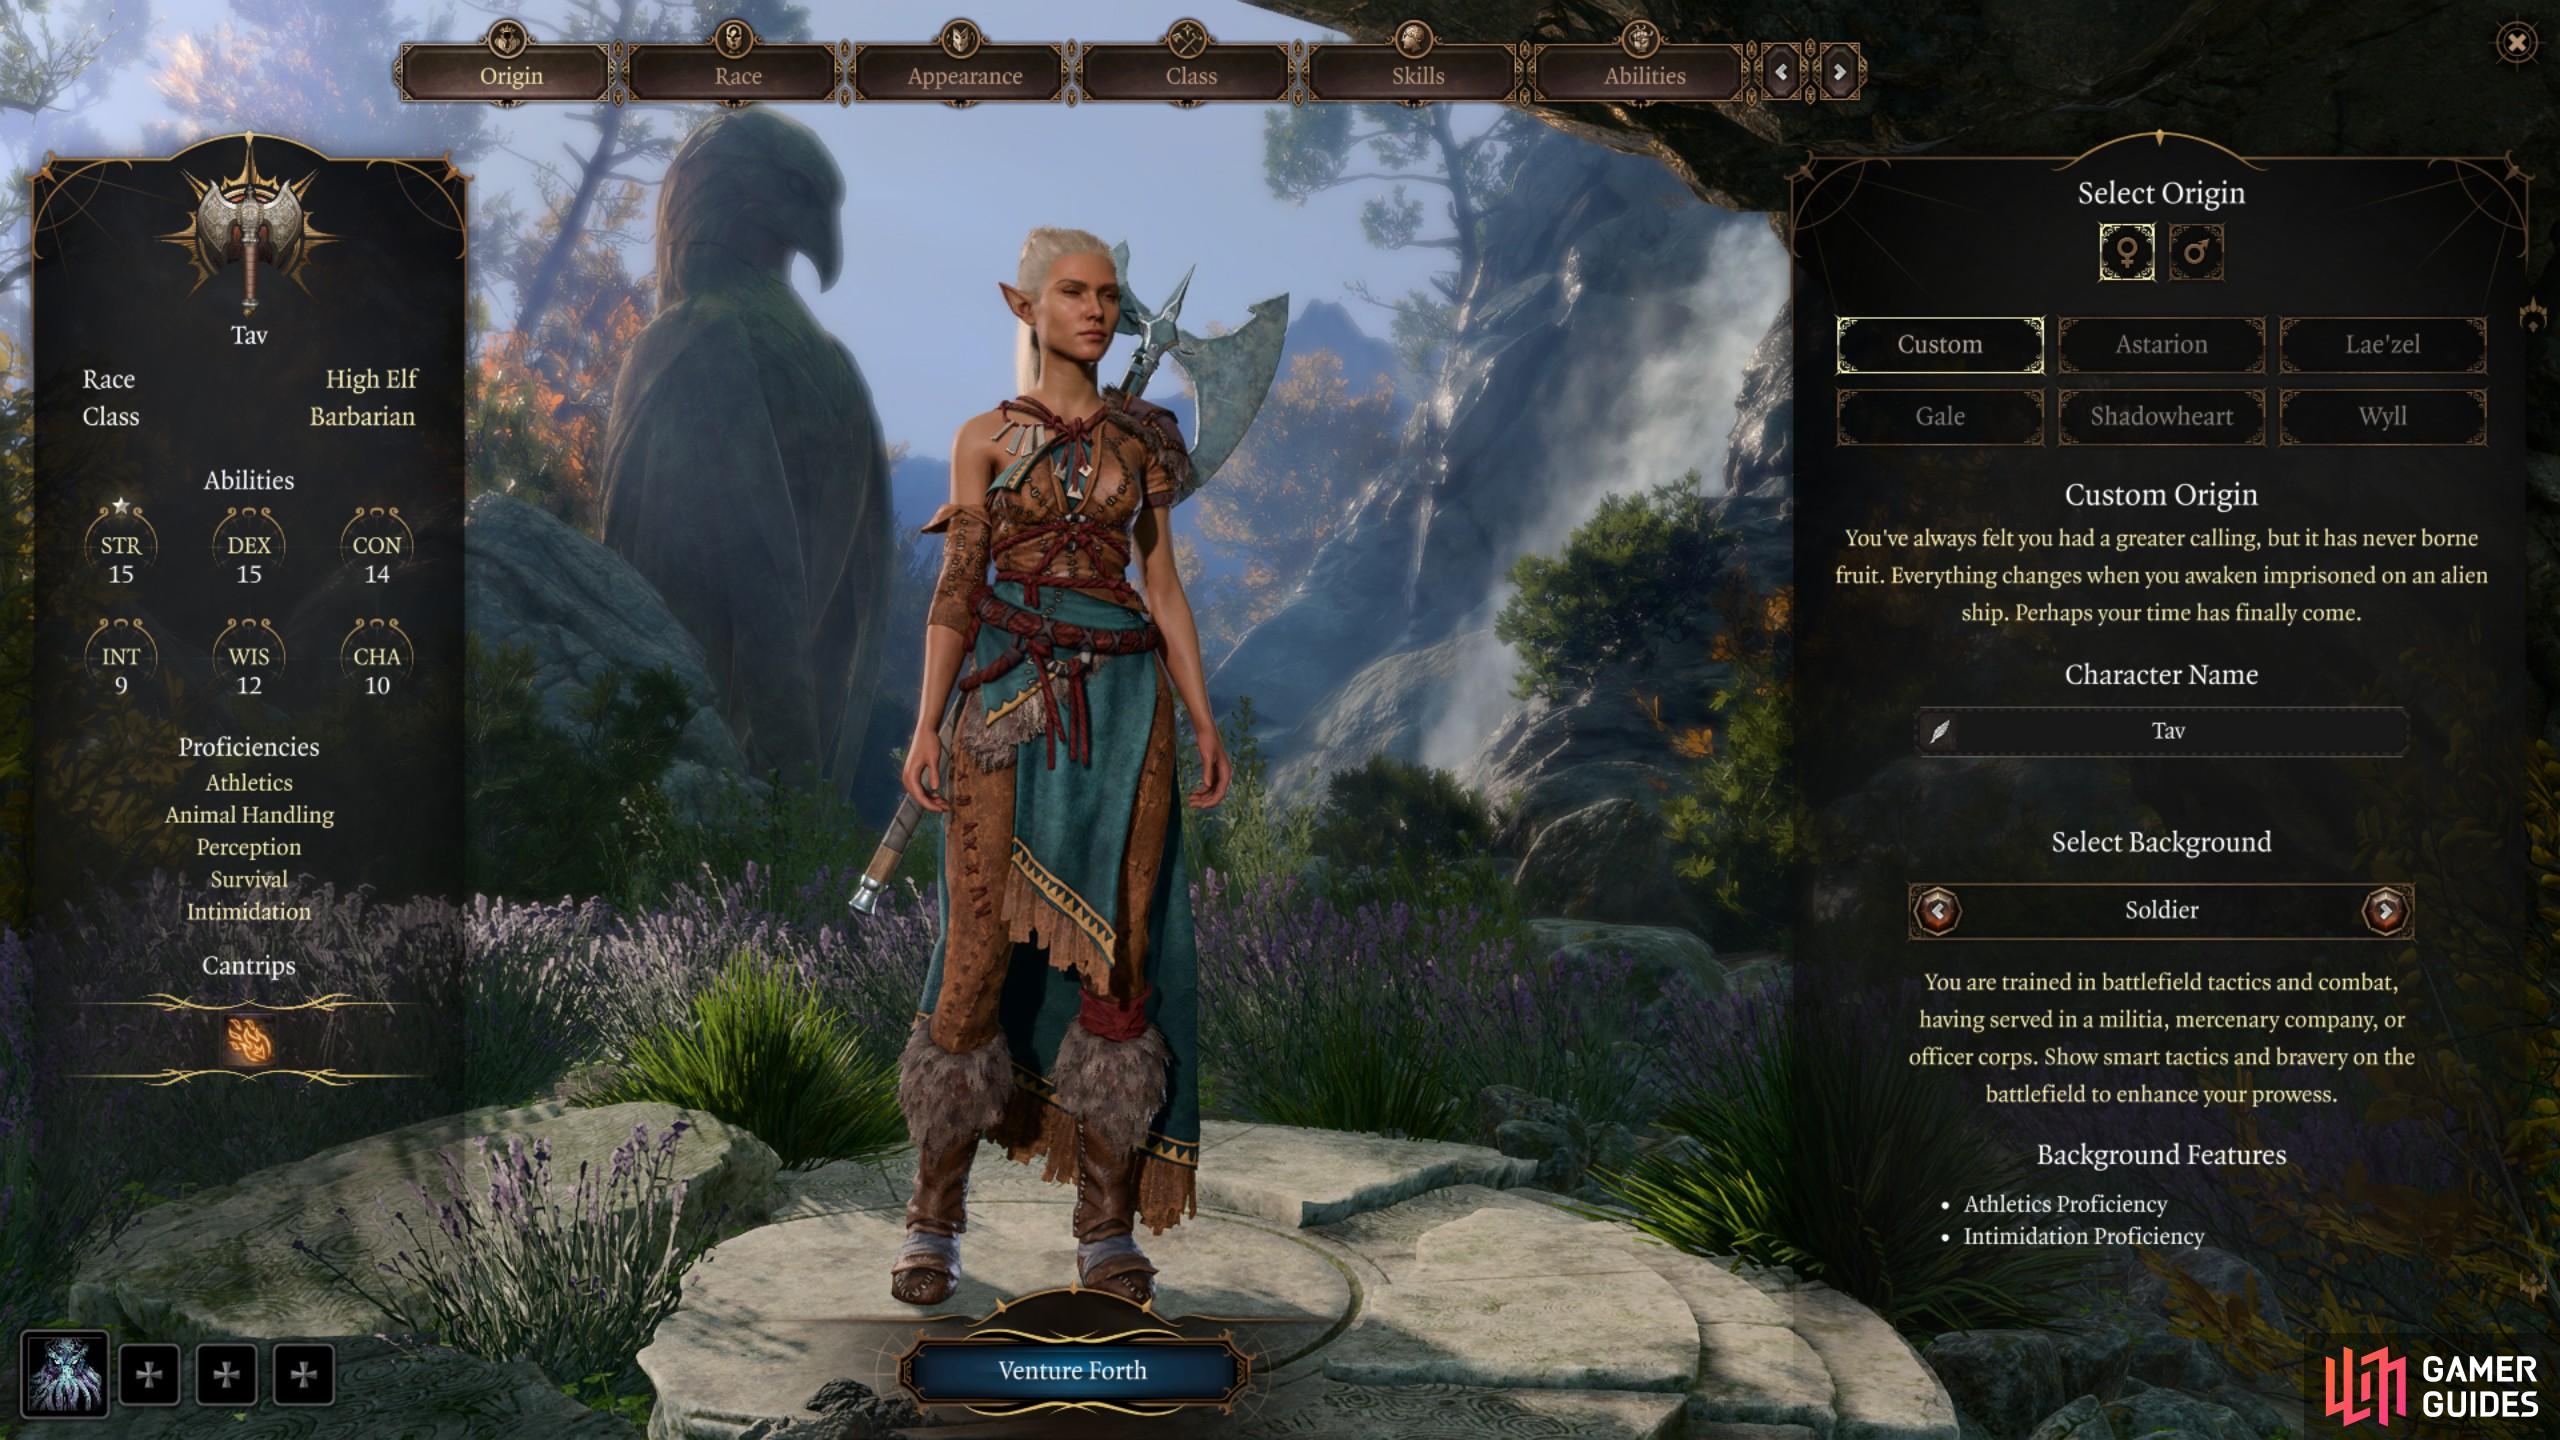 Here’s a closer look at what to expect from the Baldur’s Gate 3 Character Creation screen.